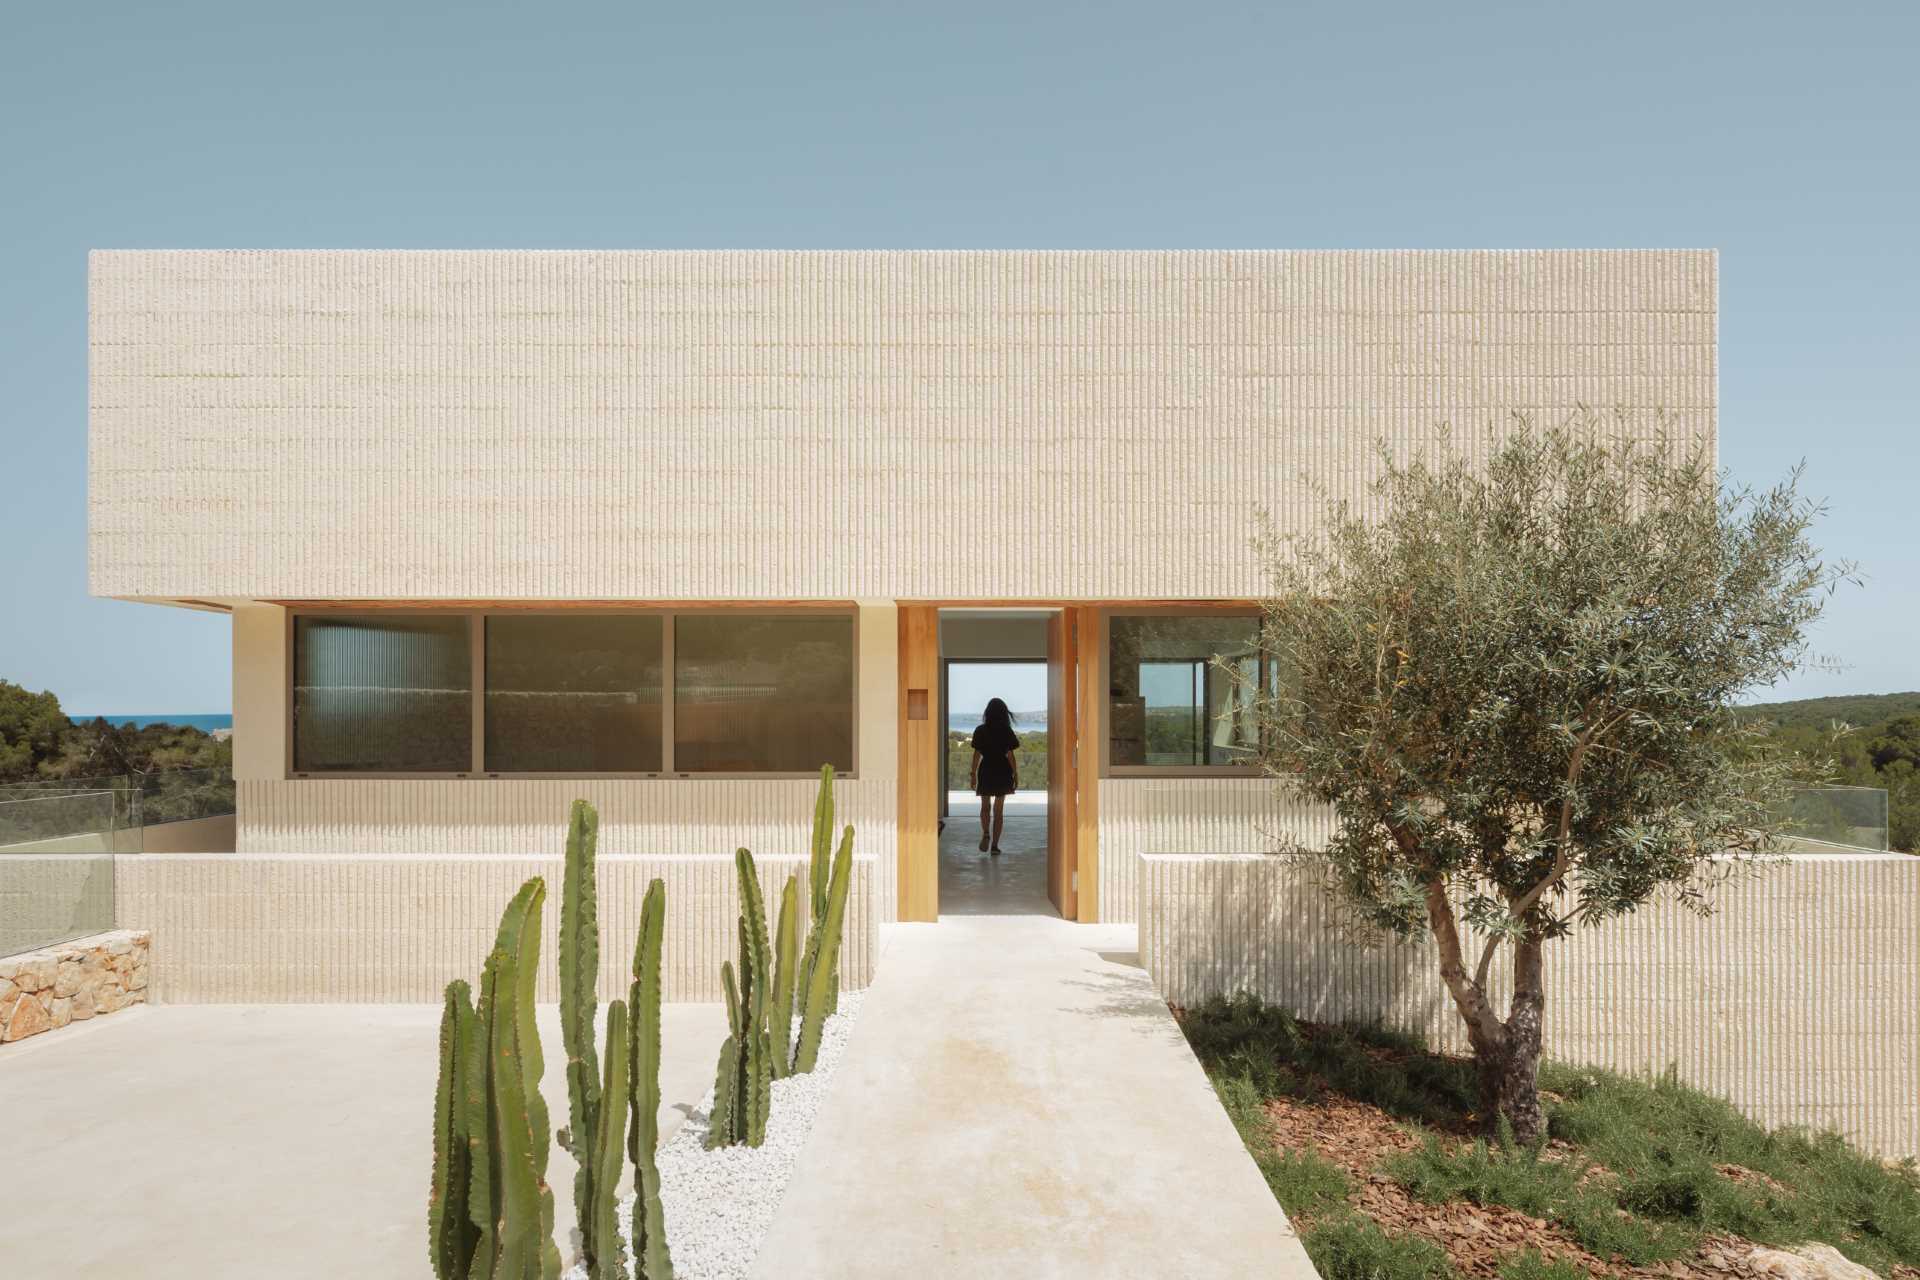 A modern multi-storey home in Menorca, Spain, that features a textured facade of fluted concrete walls.